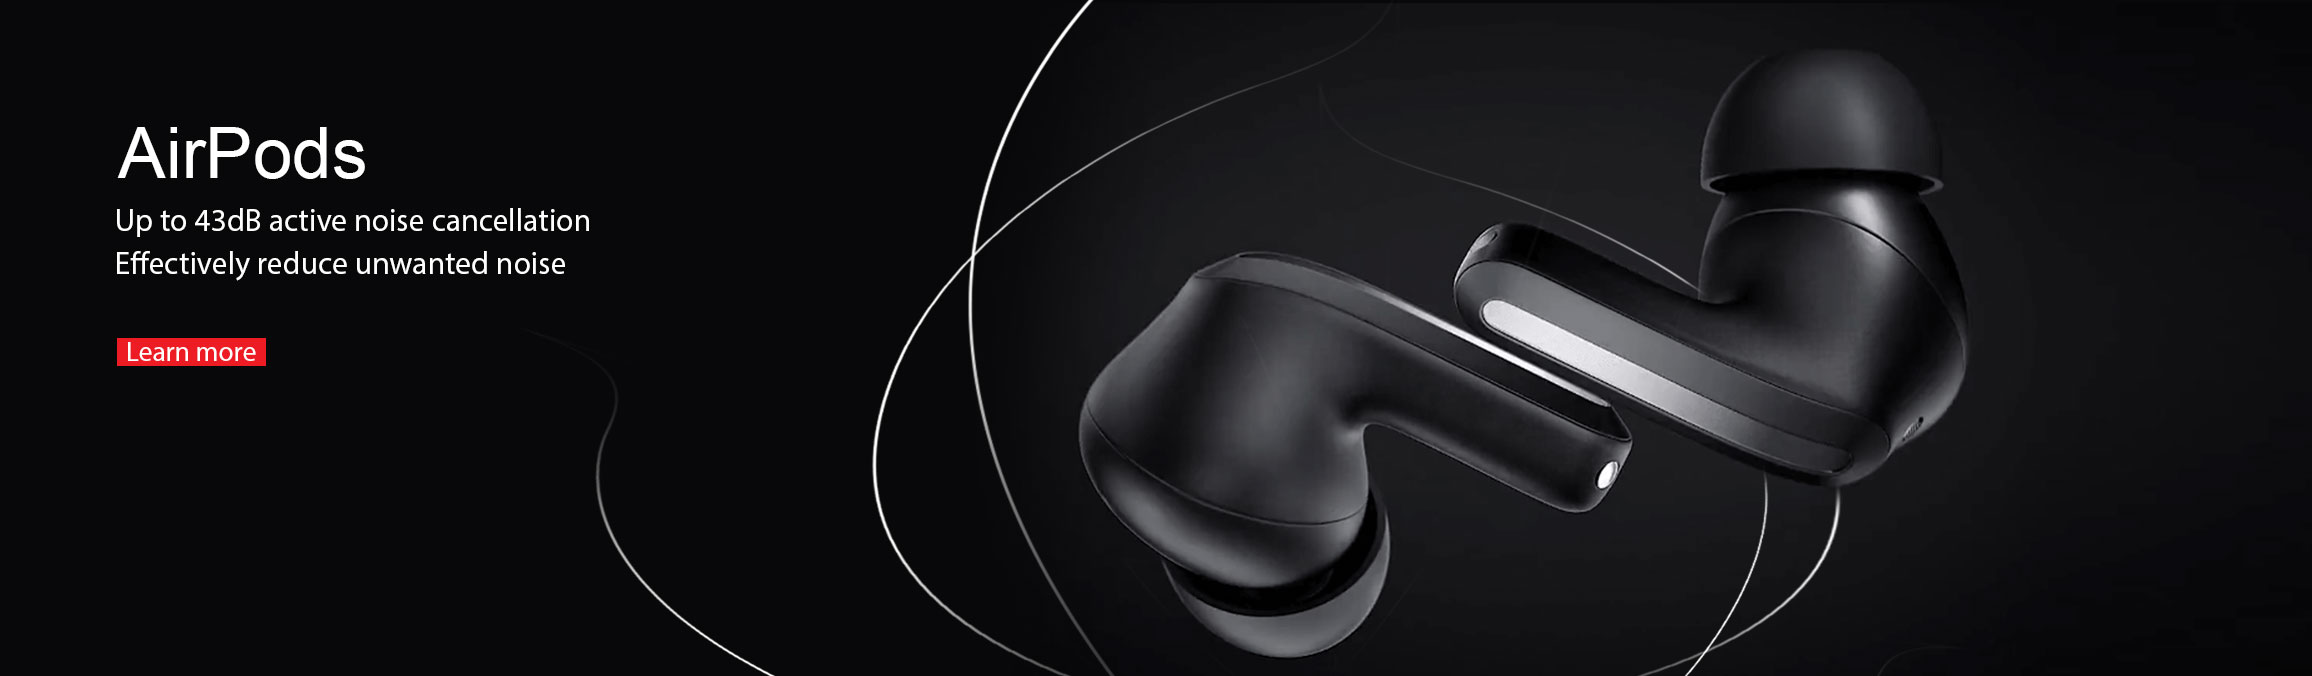 Airpods-Banner